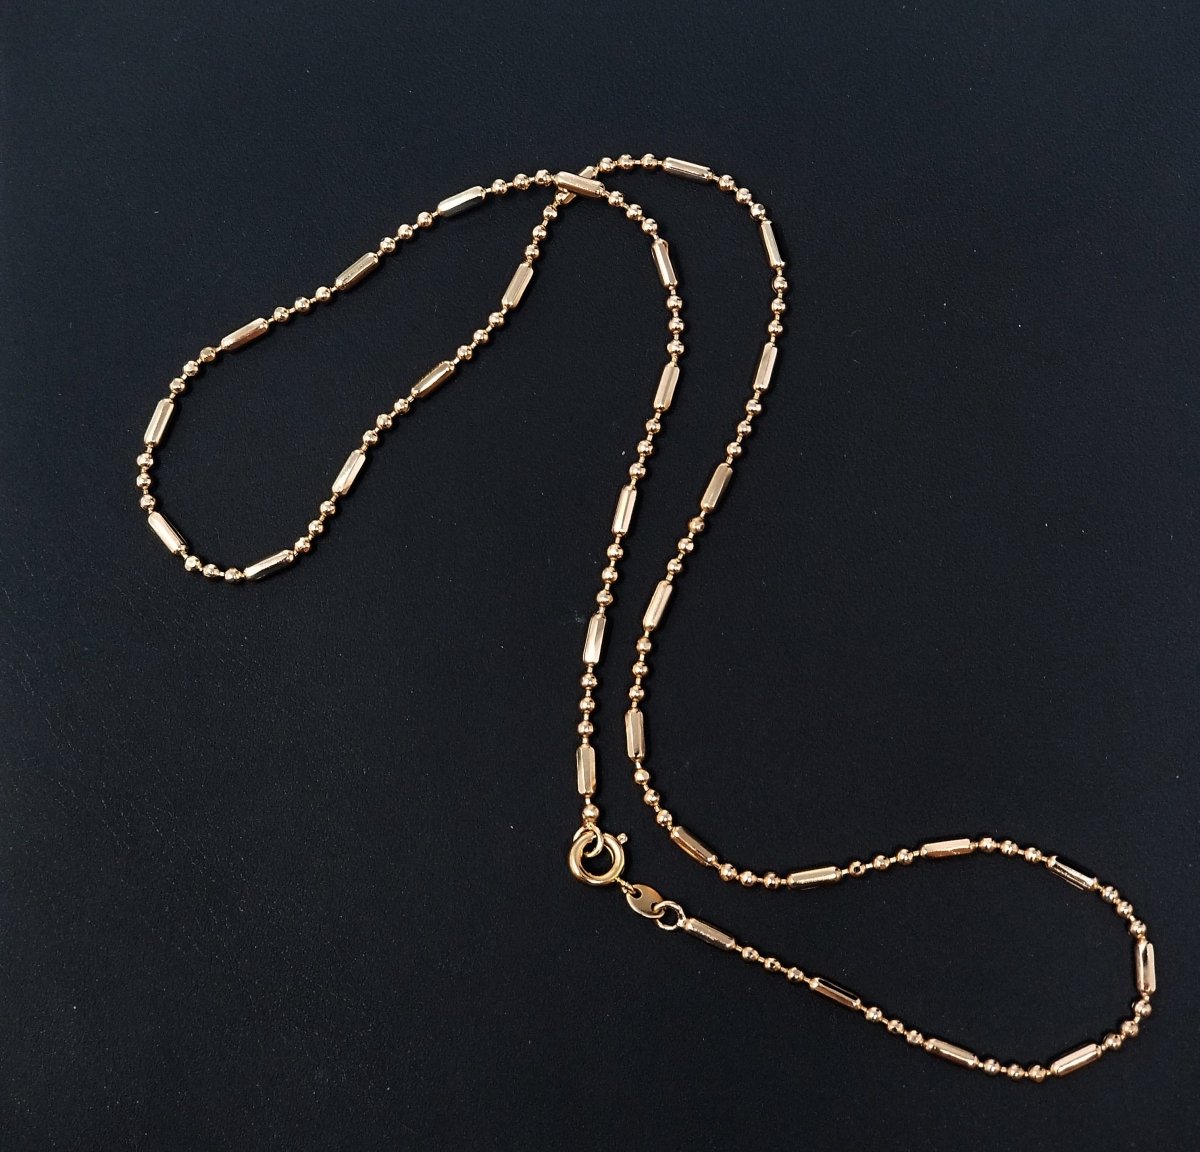 18K Gold Filled Bead Necklace Chain, 17.5 Inch Bead Finished Chain For Jewelry Making, Dainty 2.1mm Bead Necklace w/Spring Ring | CN-271 - DLUXCA